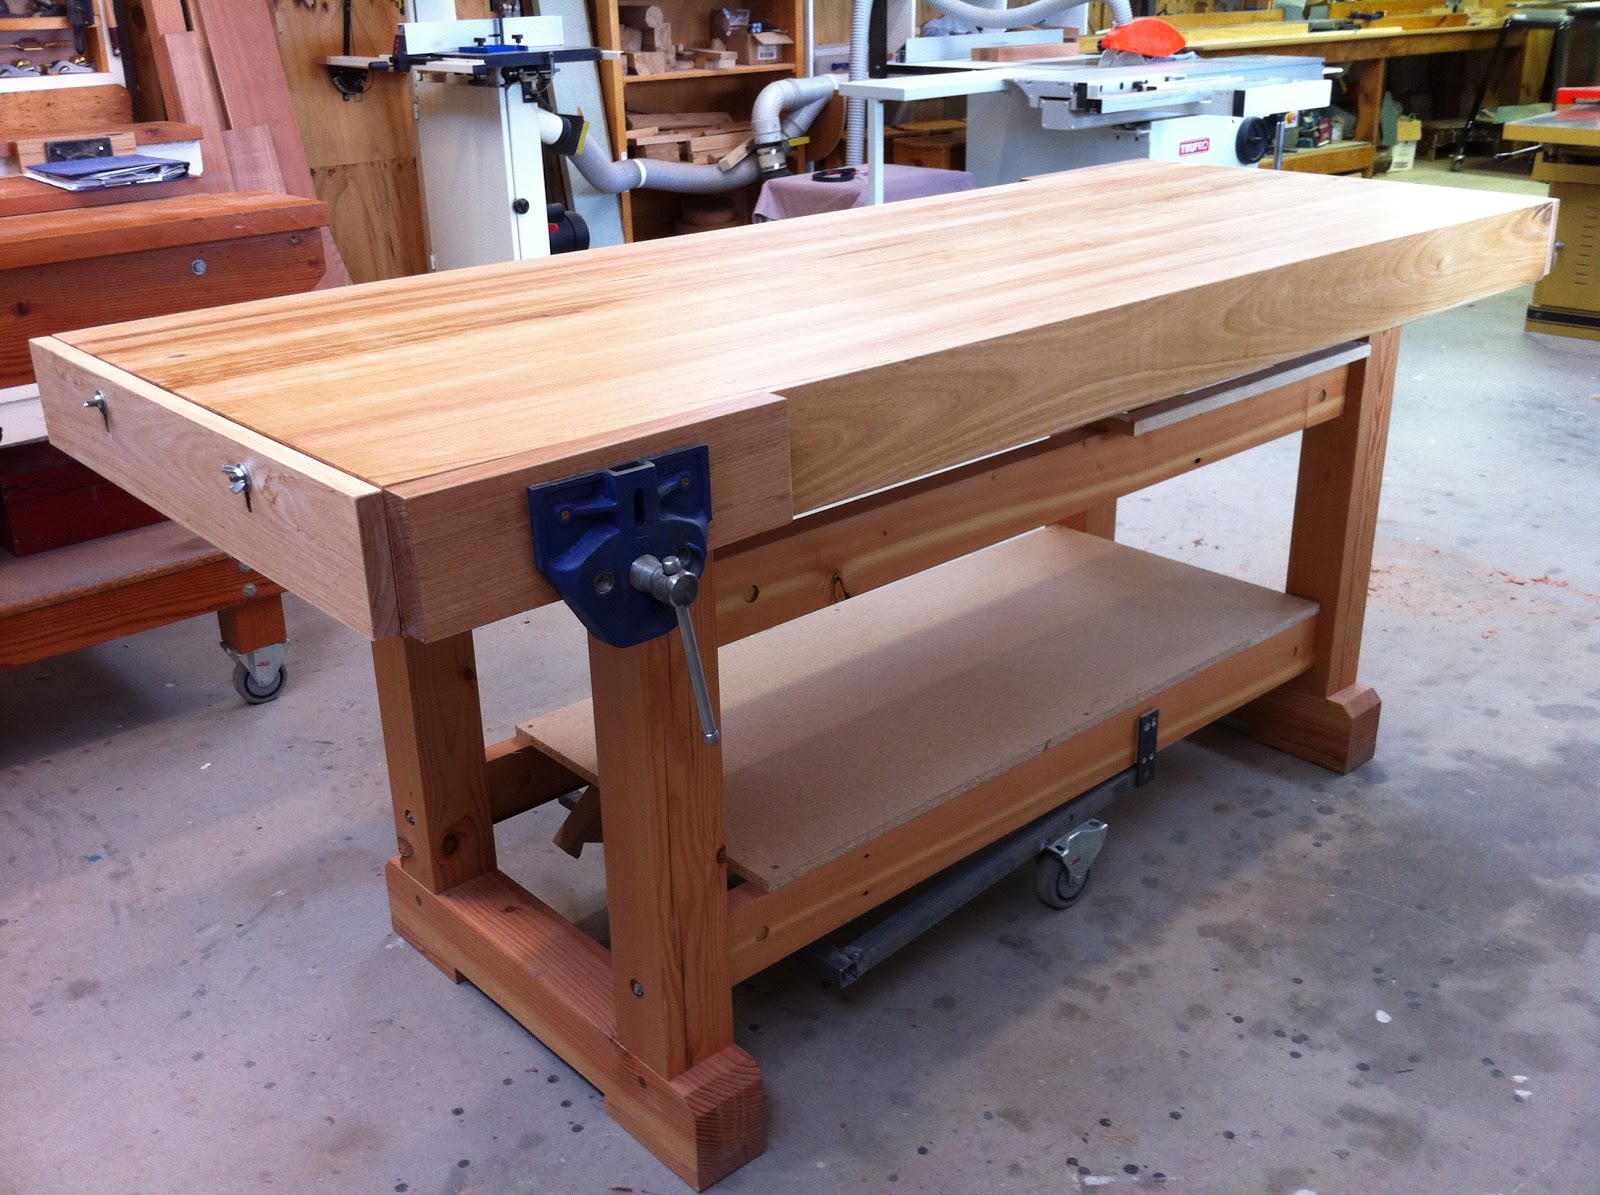 The Dovetail Joint: Work Bench - Laminated Mountain Ash Top